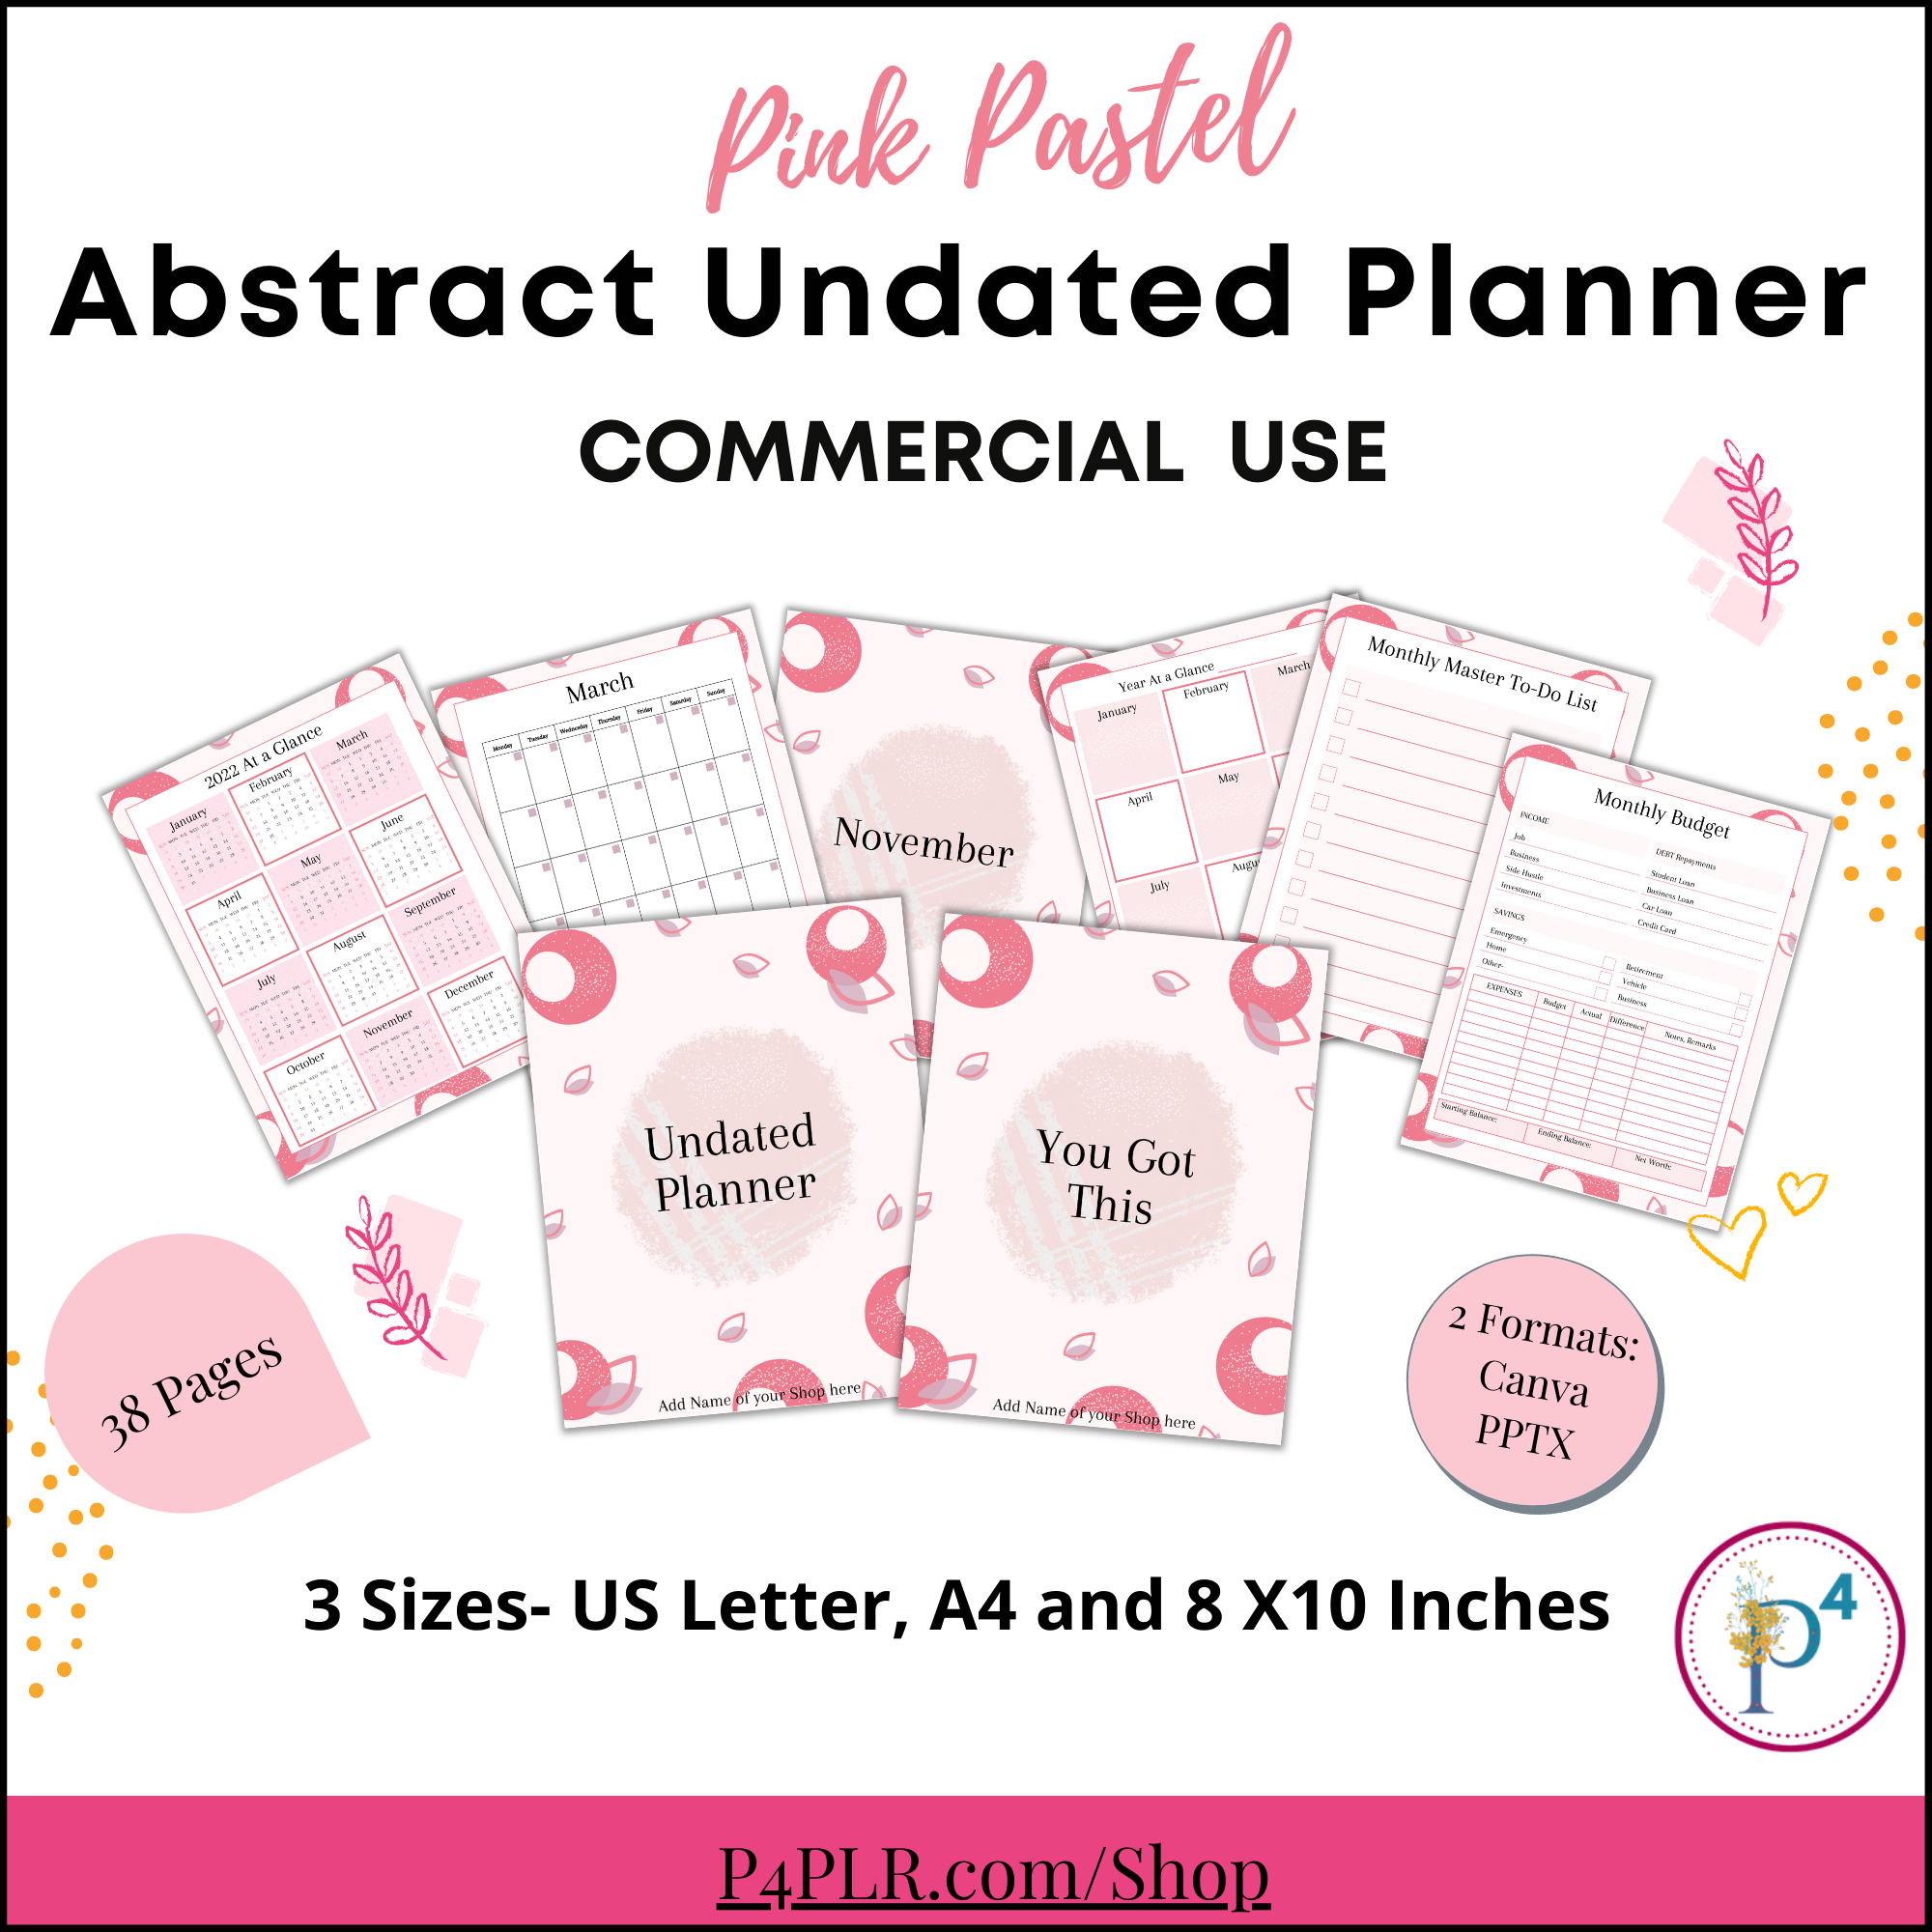 Pink Pastel Theme Abstract Undated Planner (Basic)